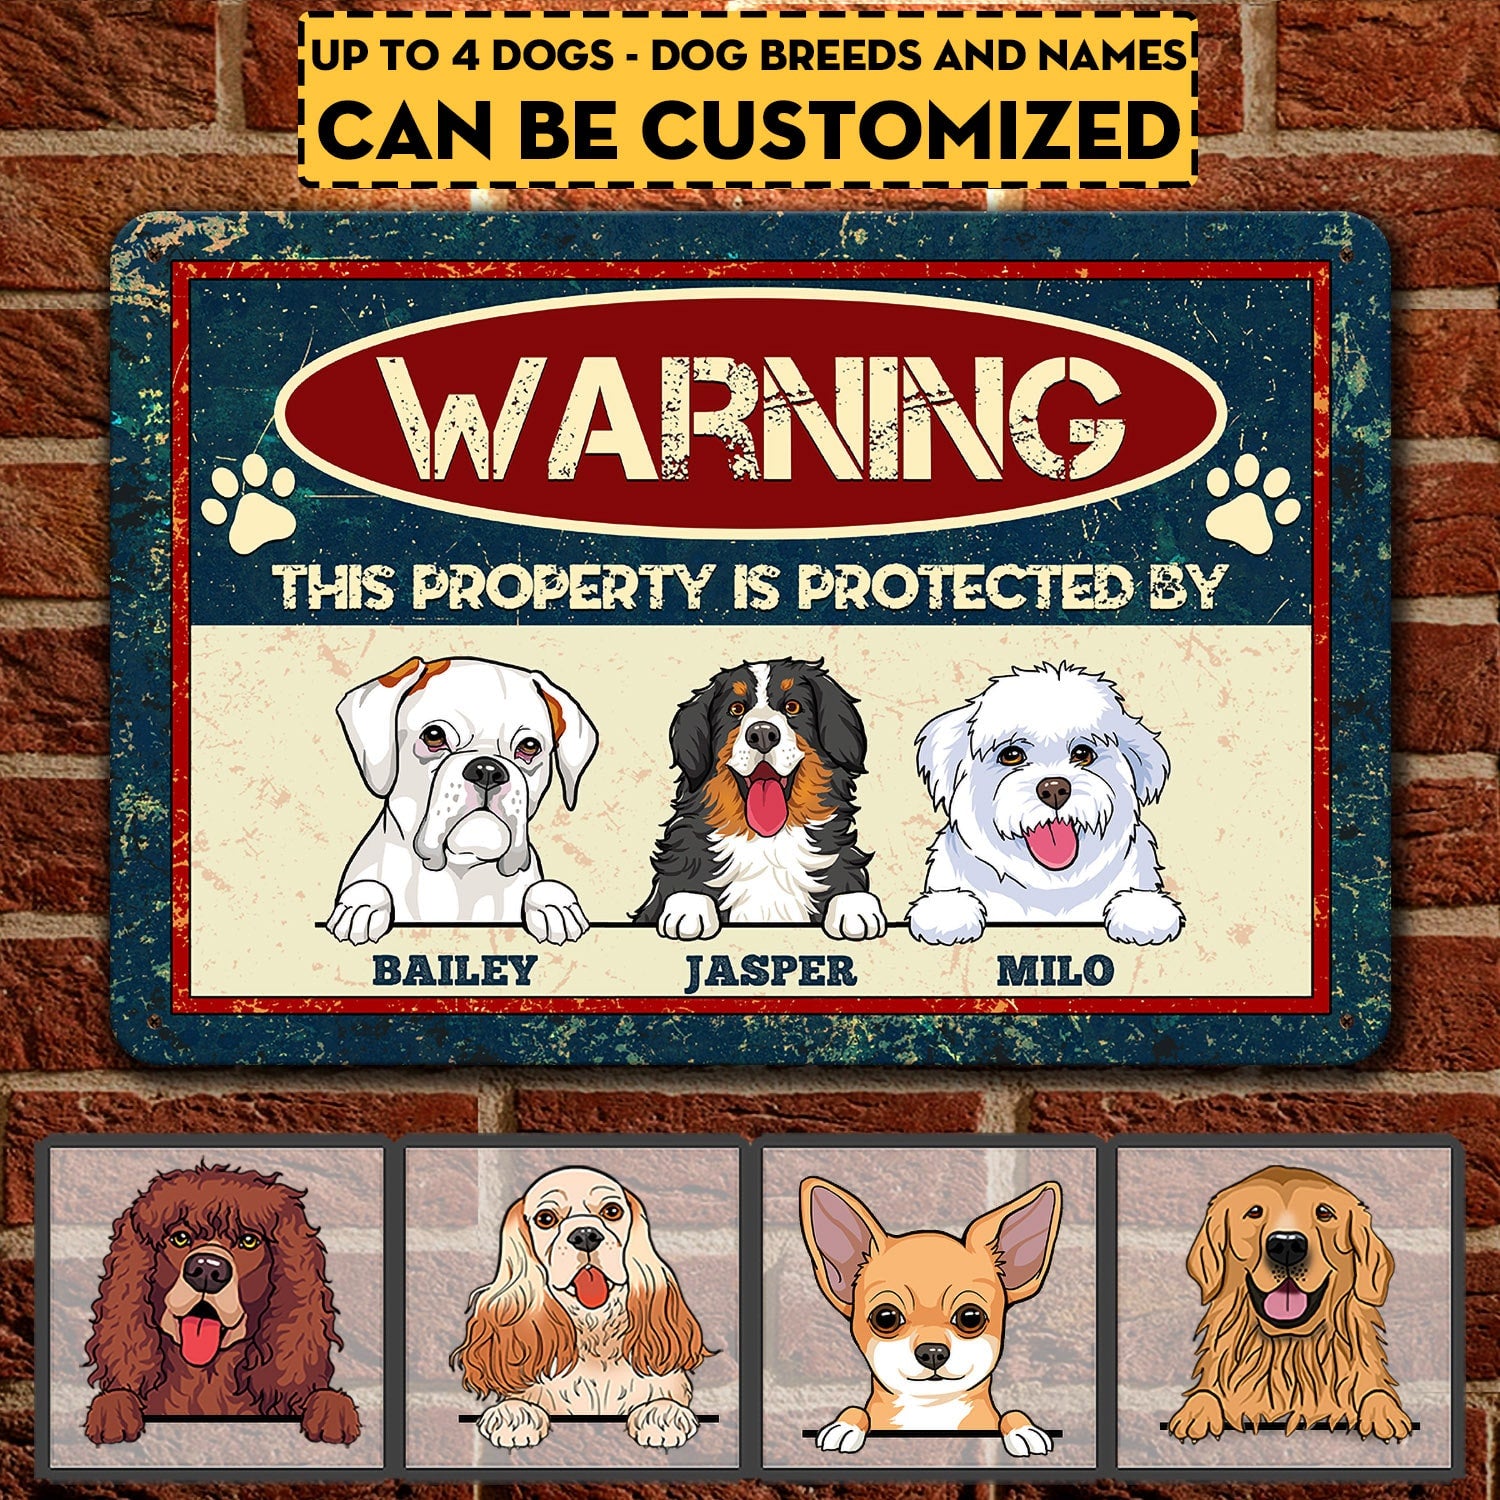 Personalized Dog Breeds Warning This Property Is Protected By Decorative Metal Sign – Dog Lover Outdoor Decor